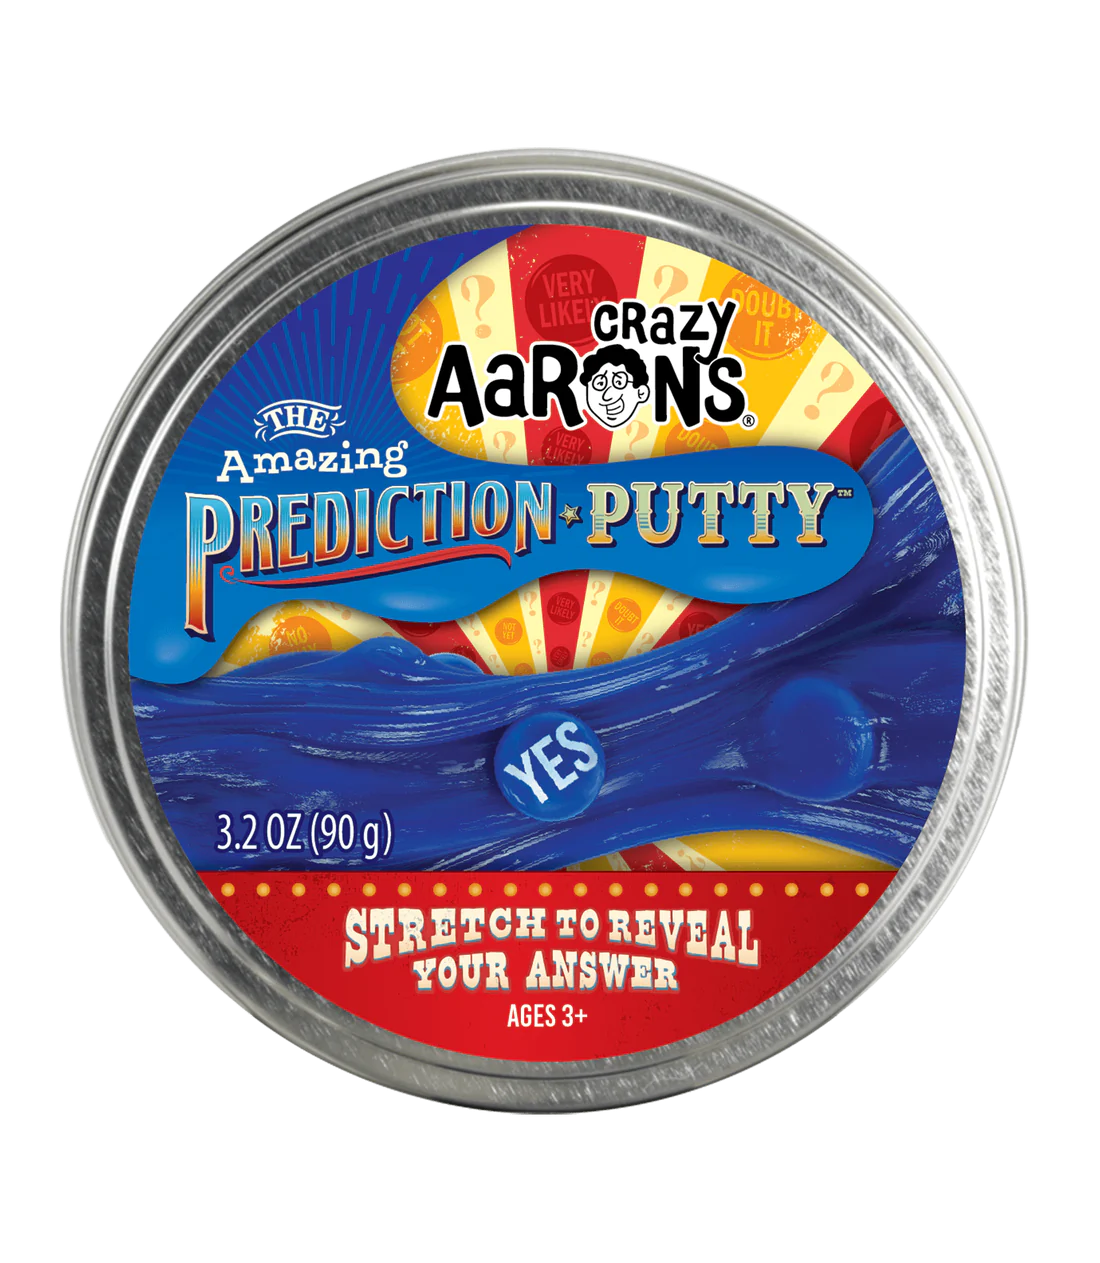 The Amazing Prediction Putty- Full Size 4" Thinking Putty Tin